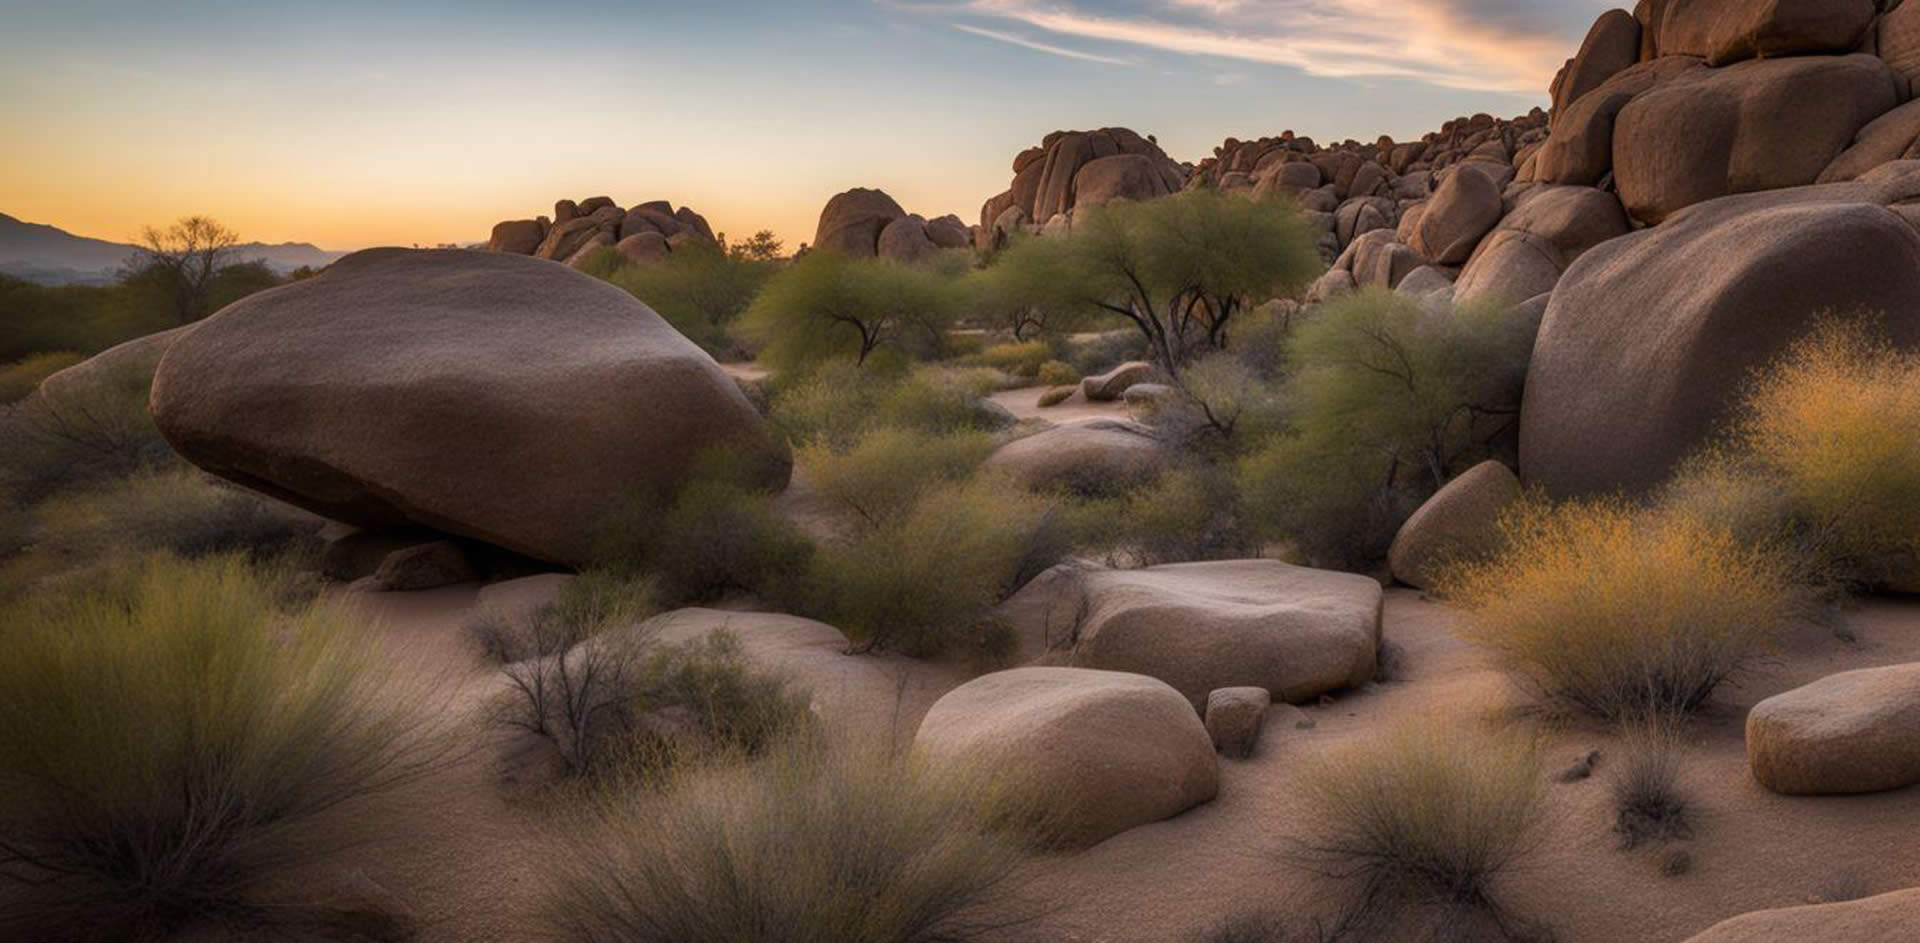 A desert landscape with rocks and bushes